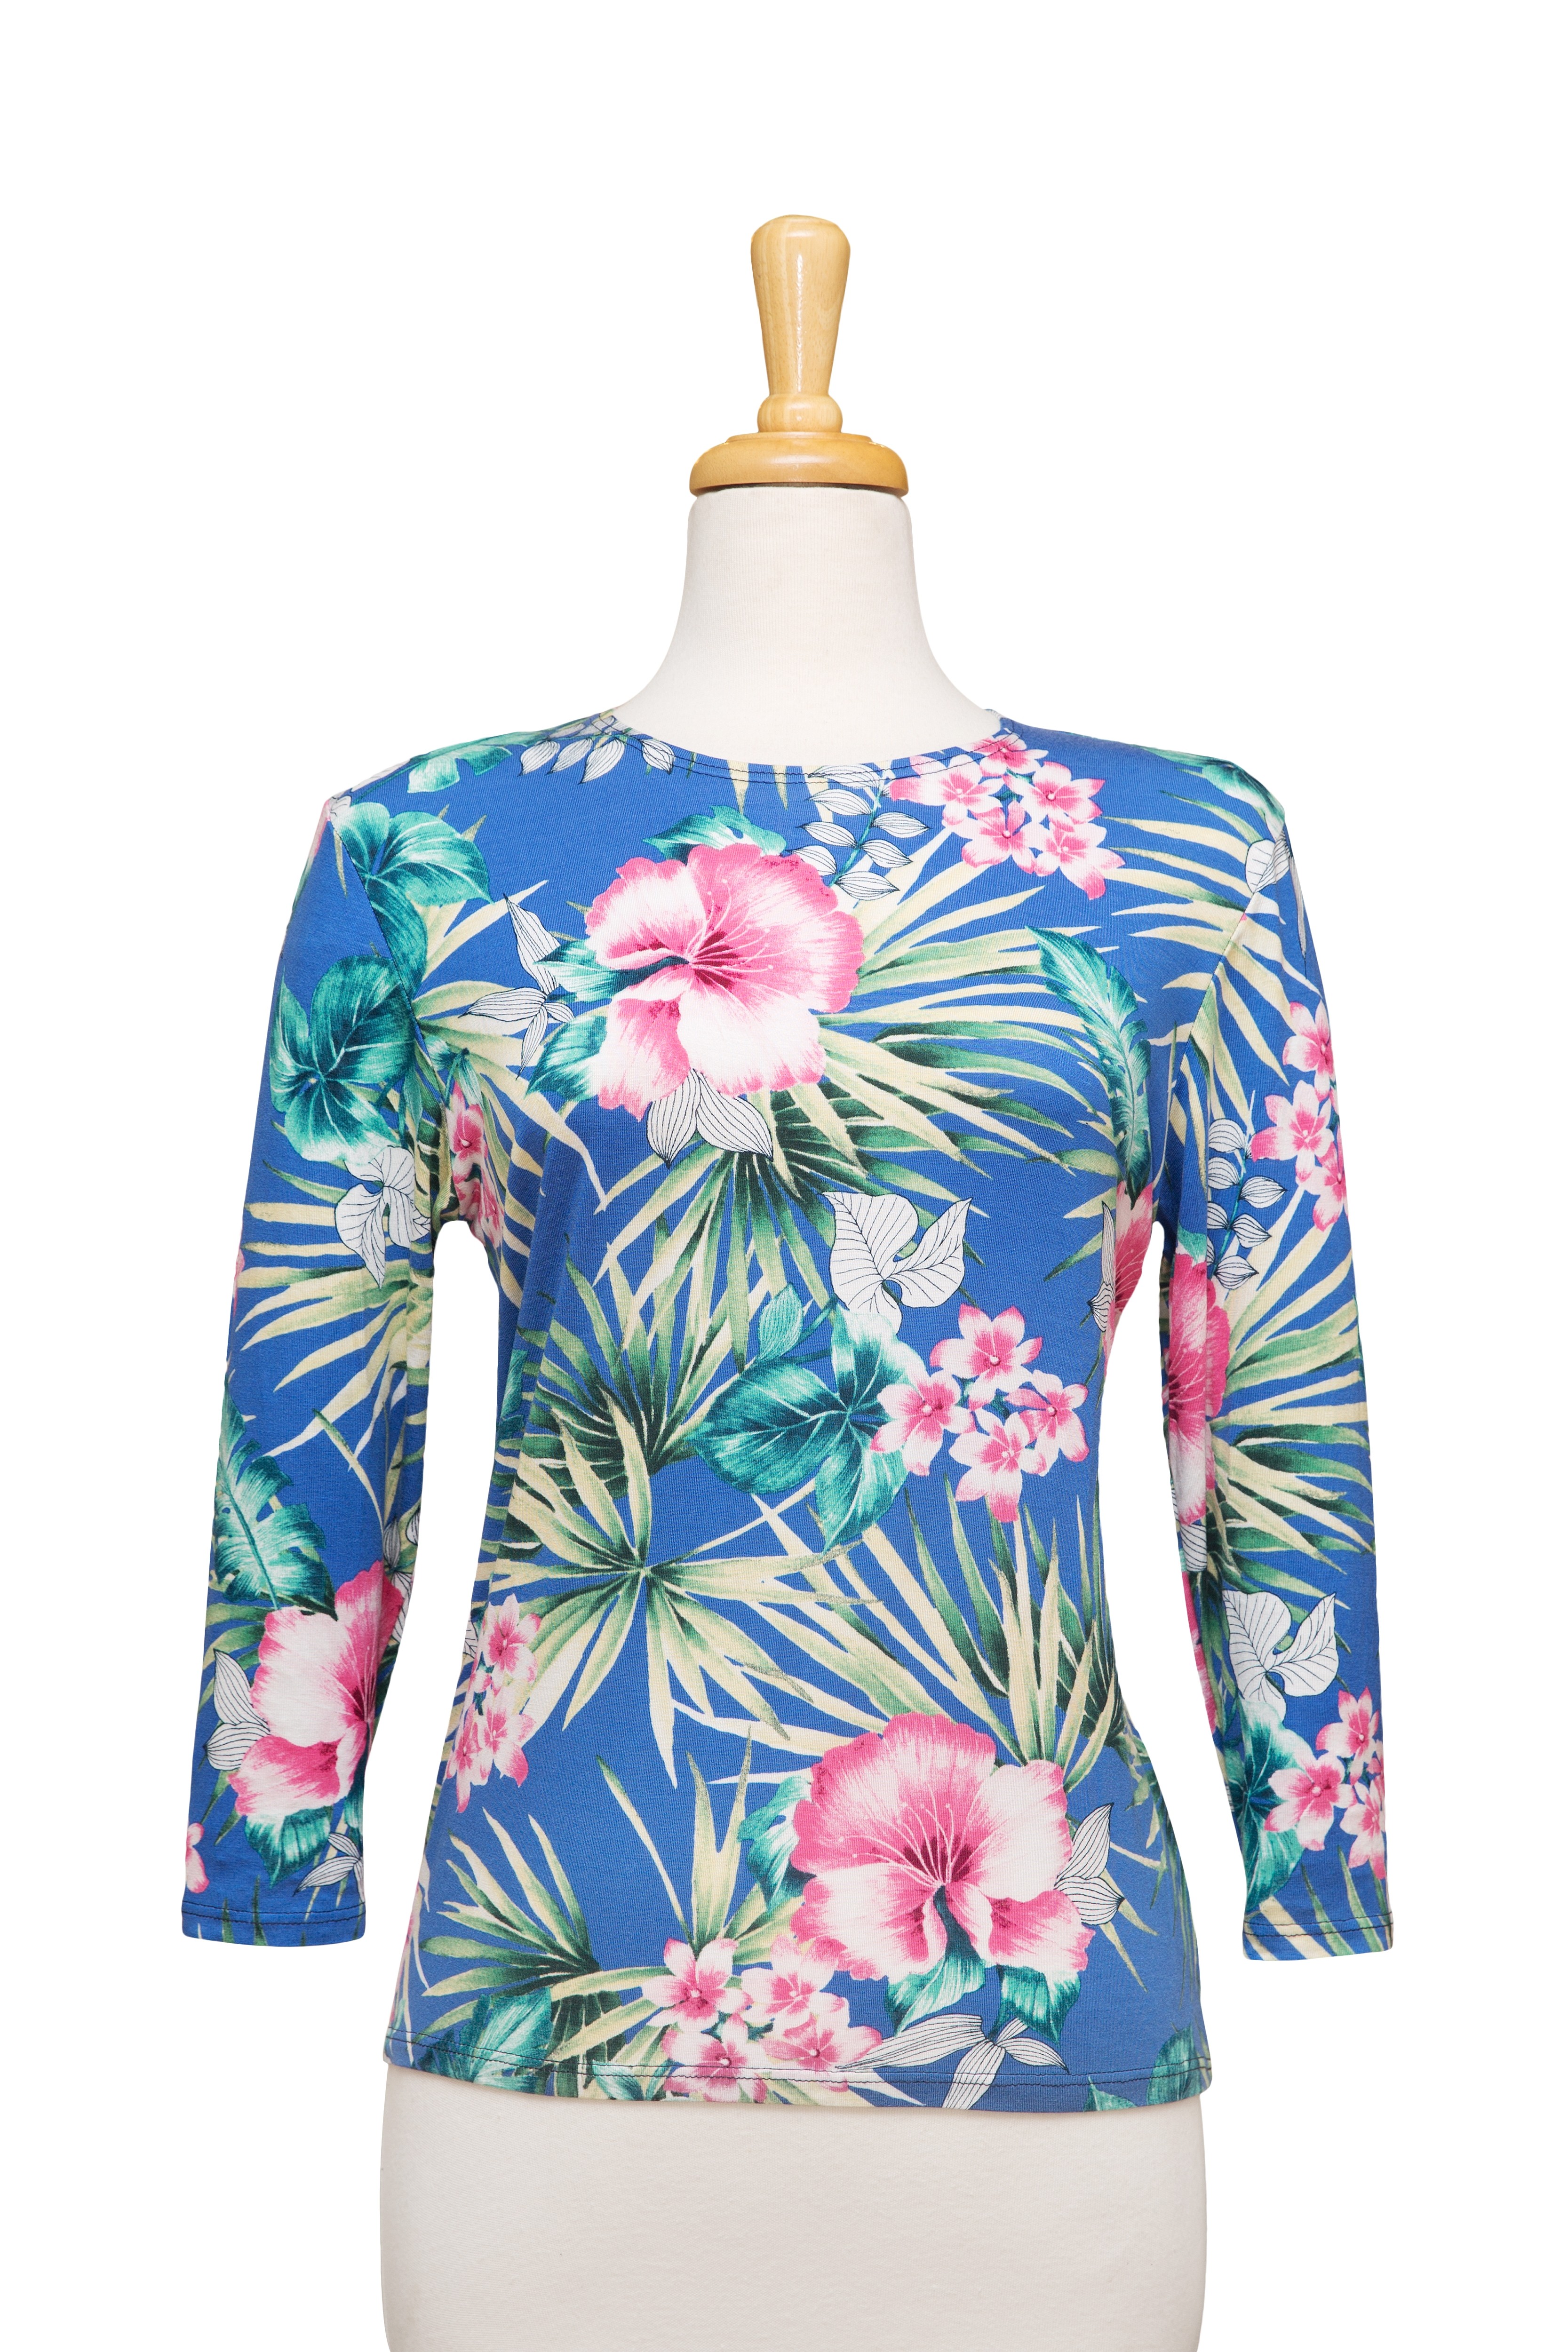 Royal Blue and Pink Tropical Floral 3/4 Sleeve  Cotton Top 